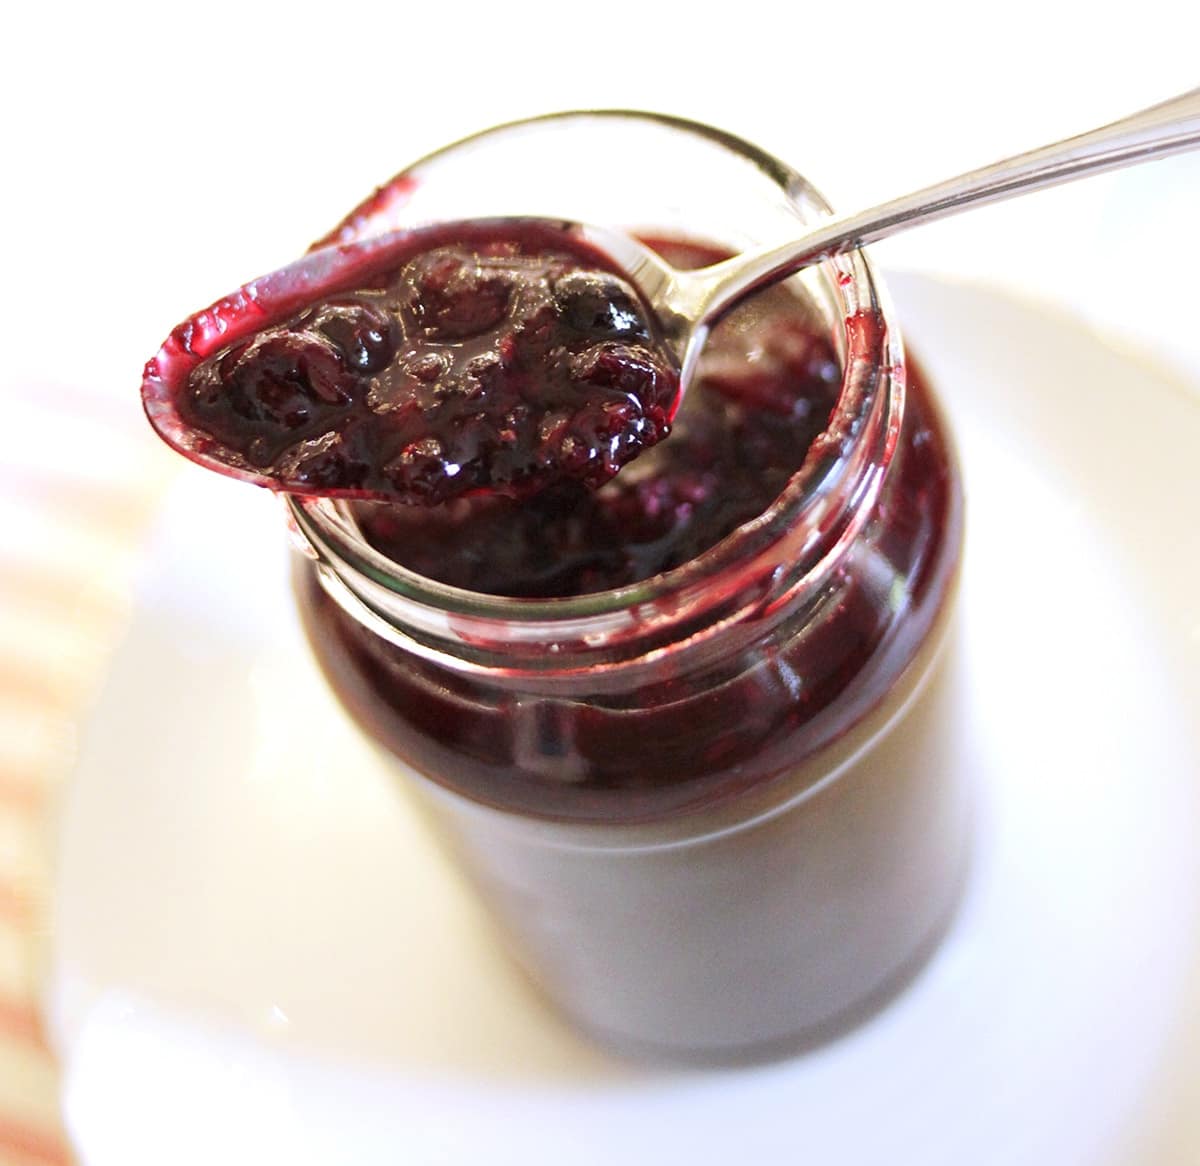 Mixed berry compote using frozen berries